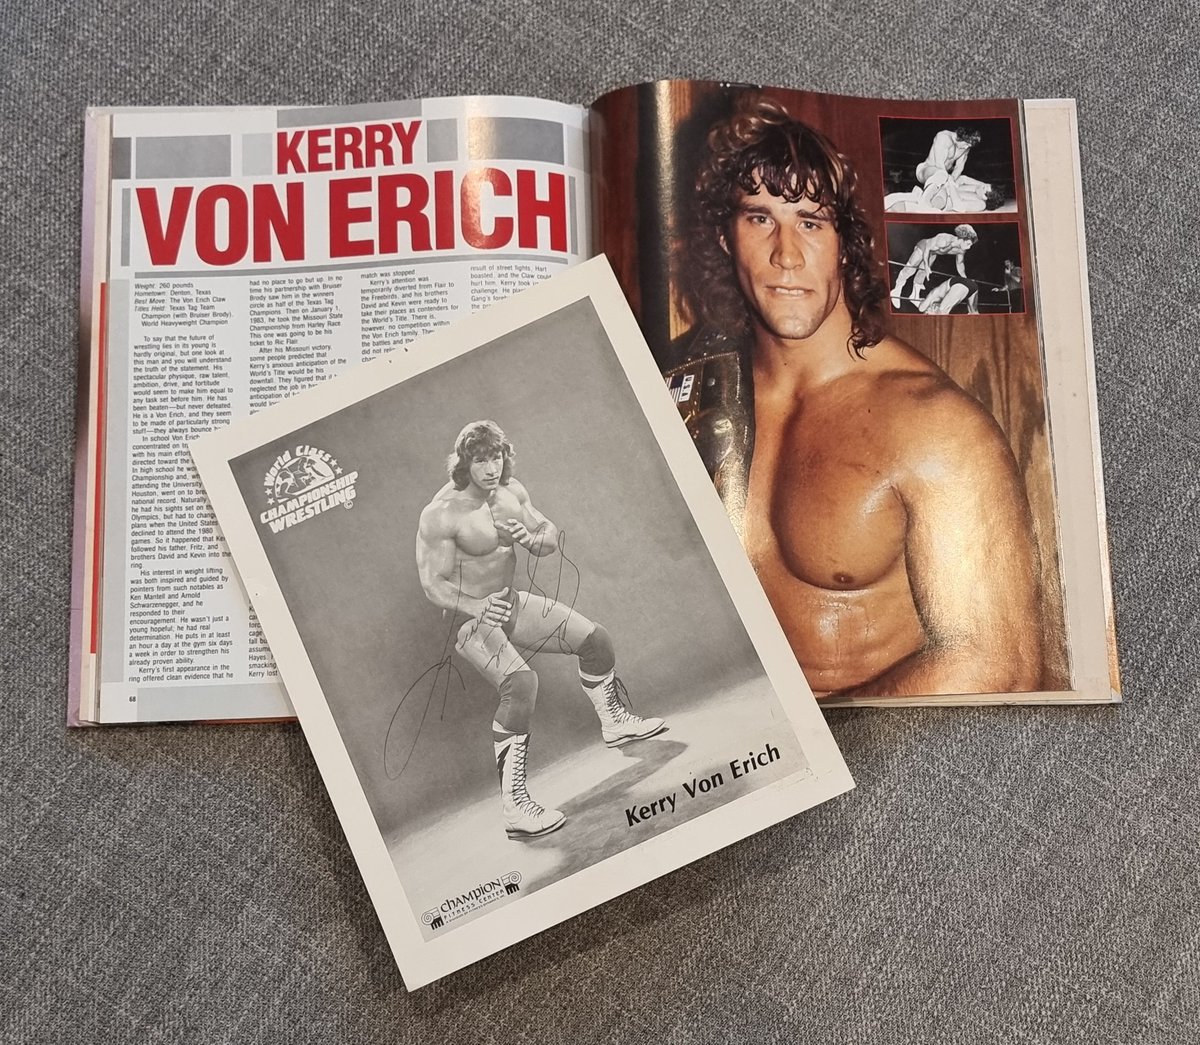 Looking forward to the upcoming 'The Iron Claw' movie. Here's an original WCCW signed promo photo of Kerry Von Erich from the '80s.
#TheIronClaw
#kerryvonerich